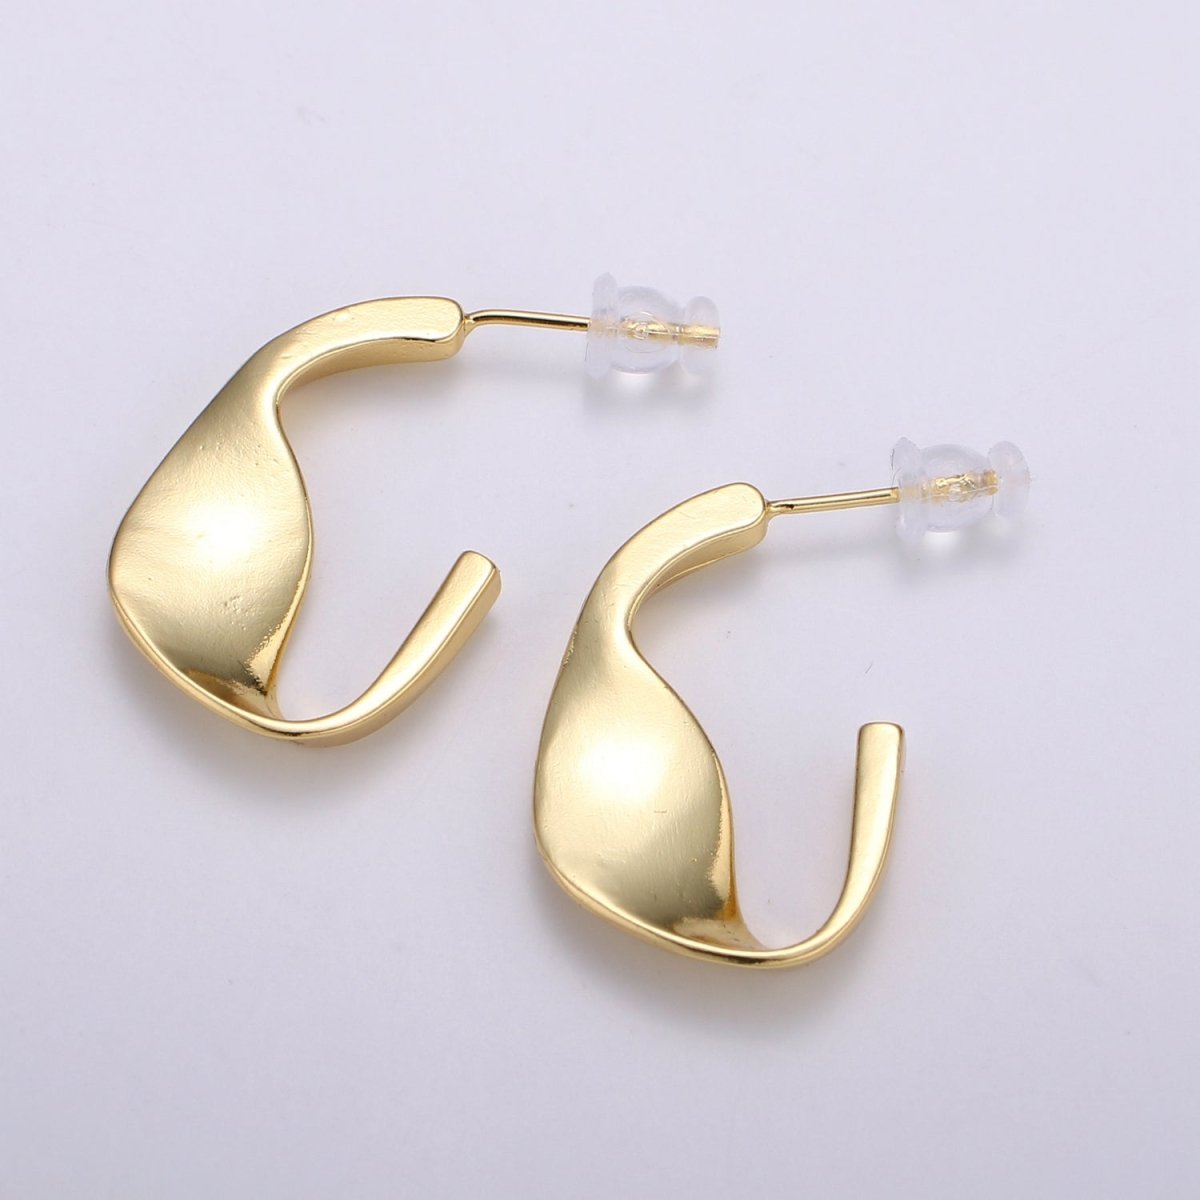 24.5 mm Plead Hook Hoops 14K Gold Plated, Weavy Gold Earrings for DIY Earring Craft Supply Jewelry Making Q-411 - DLUXCA